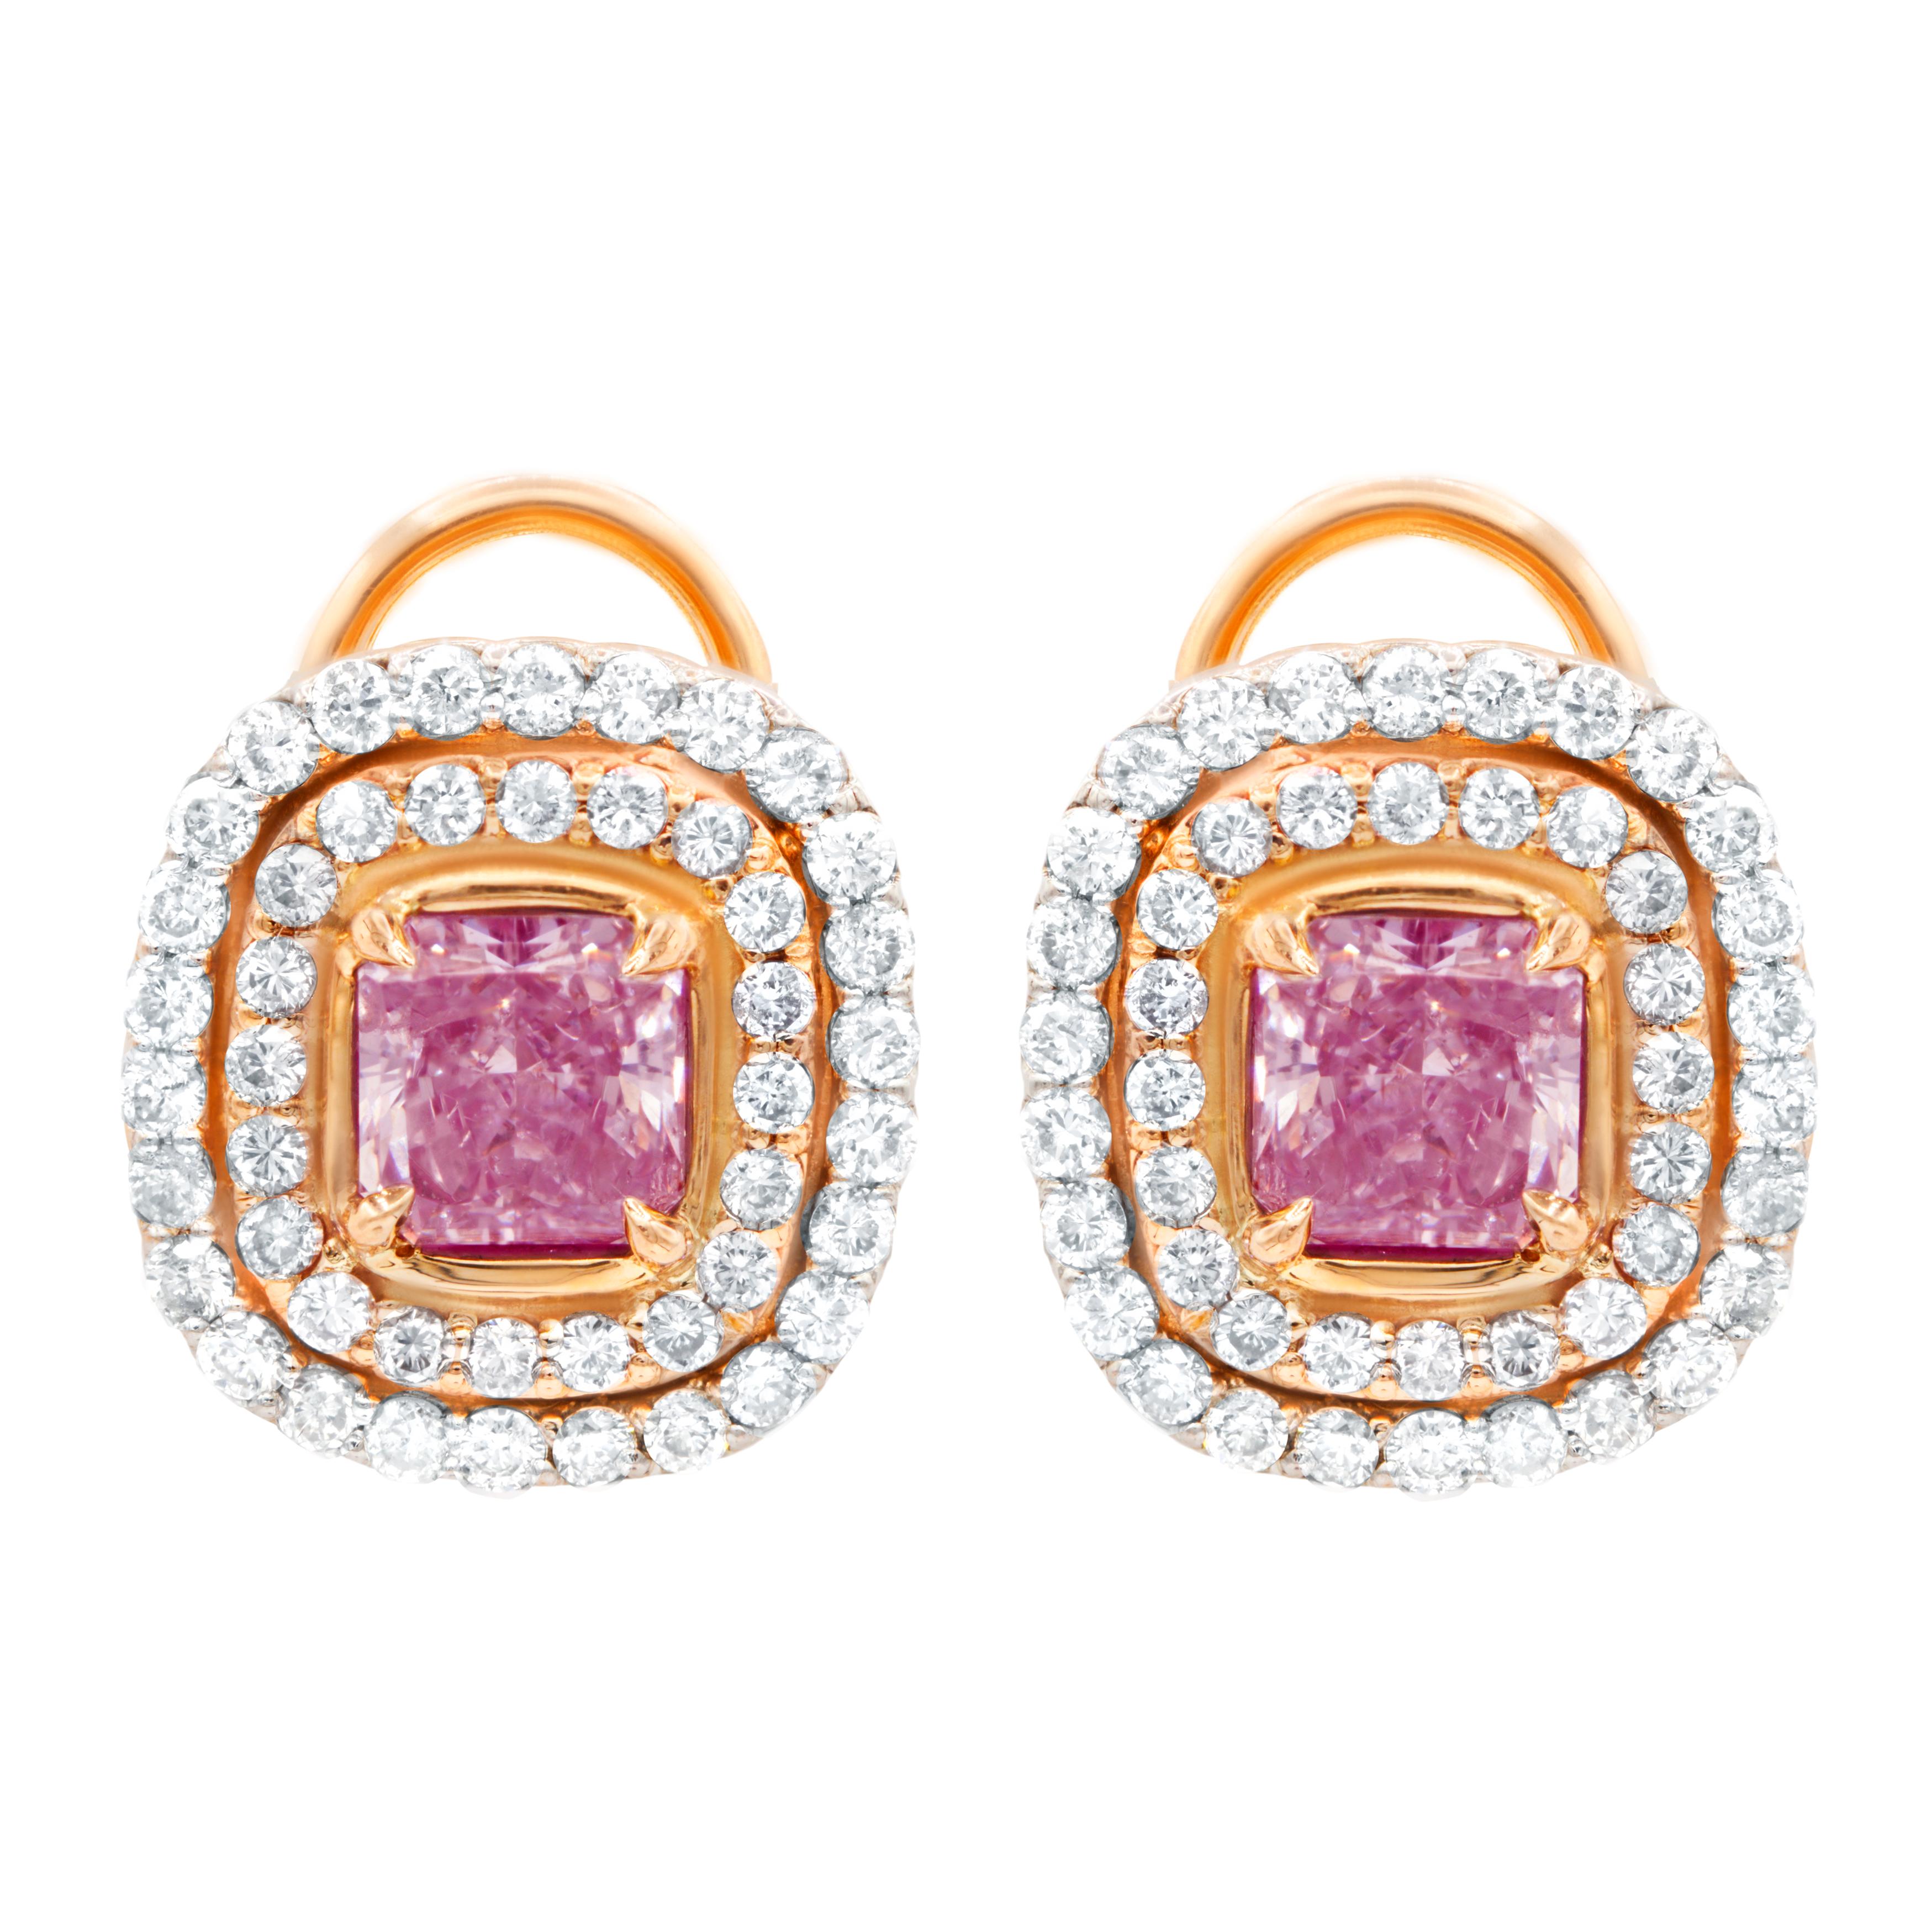 18kt rosegold fancy light pink diamond earrings, features .79 fancy light pink (radc1008) and 1.01 fancy light pink (radc1009)total 1.80ct radiant cut diamonds  set in halo setting with 1.50ct of side  pink and white diamonds set in  micropave halo